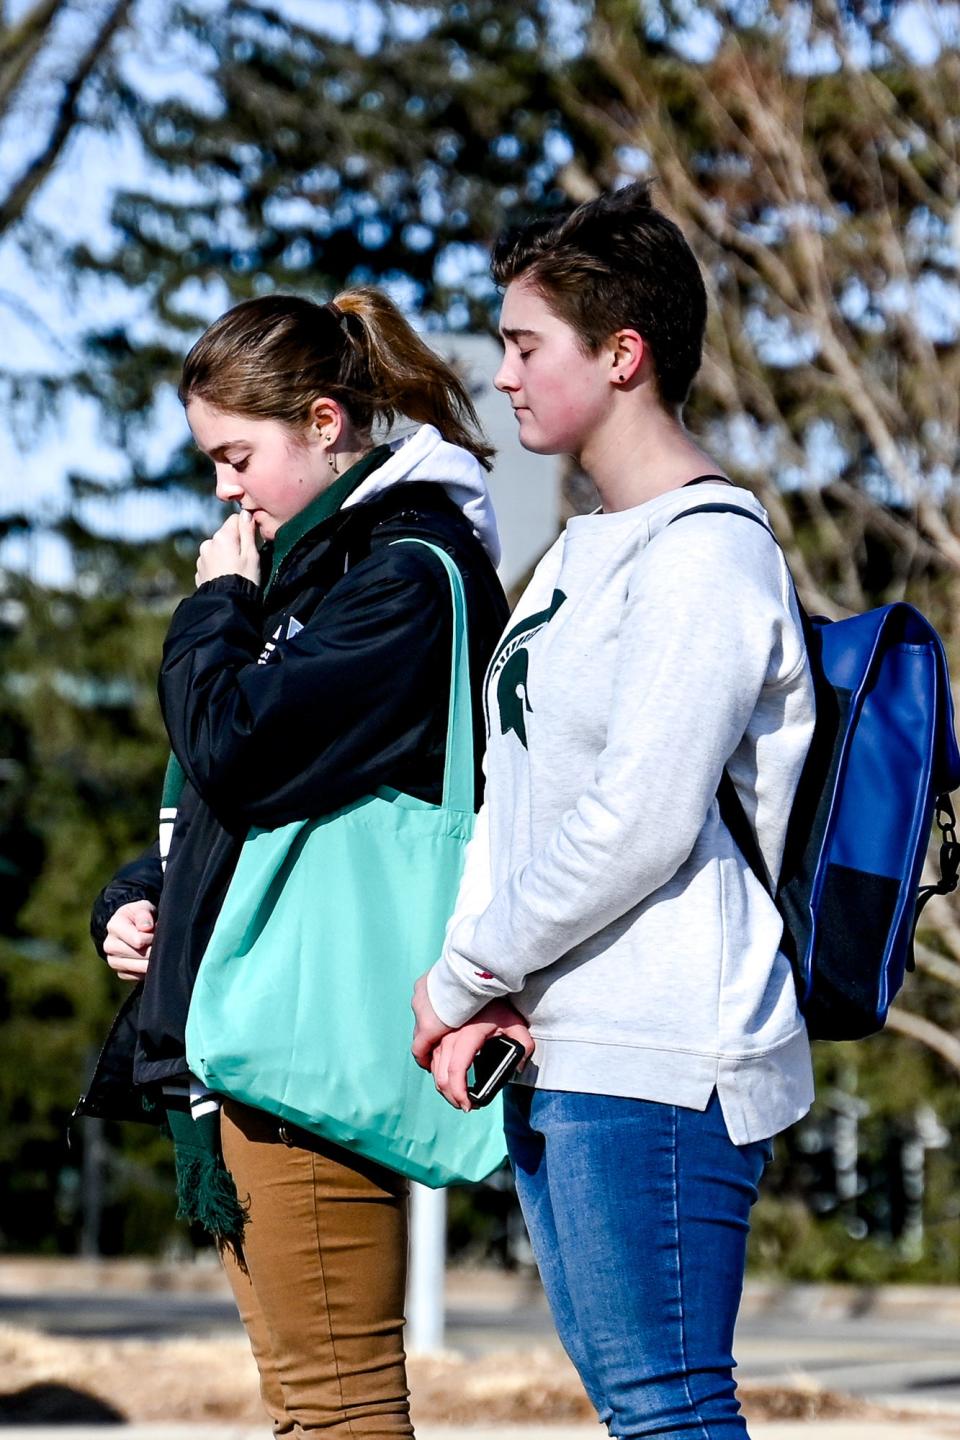 Michigan State sophomore Emma Nicolaysen, left, and her sister, junior Maren, pause to reflect at the Sparty statue on Tuesday, Feb. 14, 2023, on the MSU campus in East Lansing.